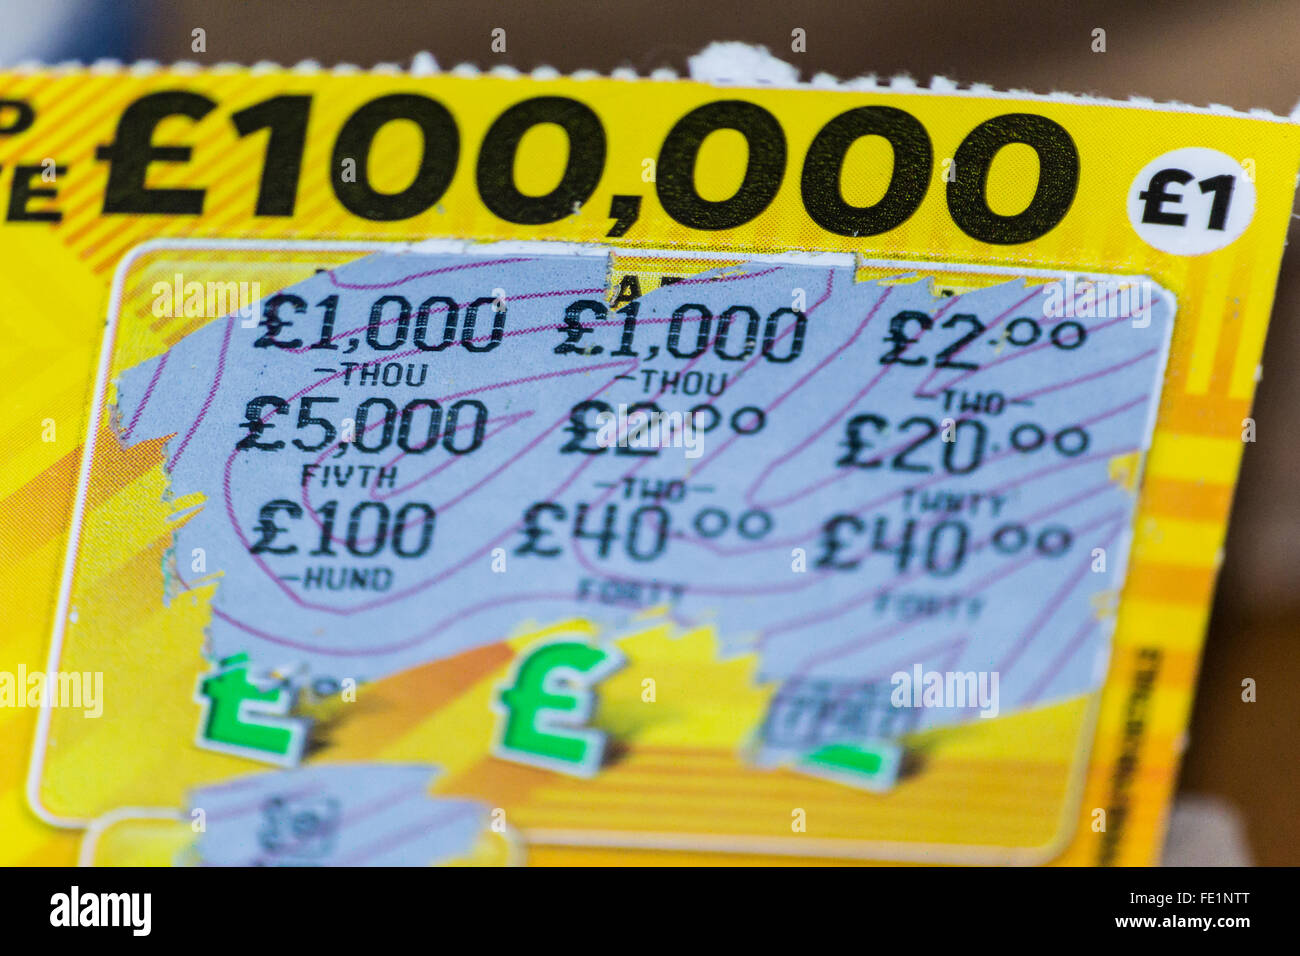 A national lottery scratchcard Stock Photo